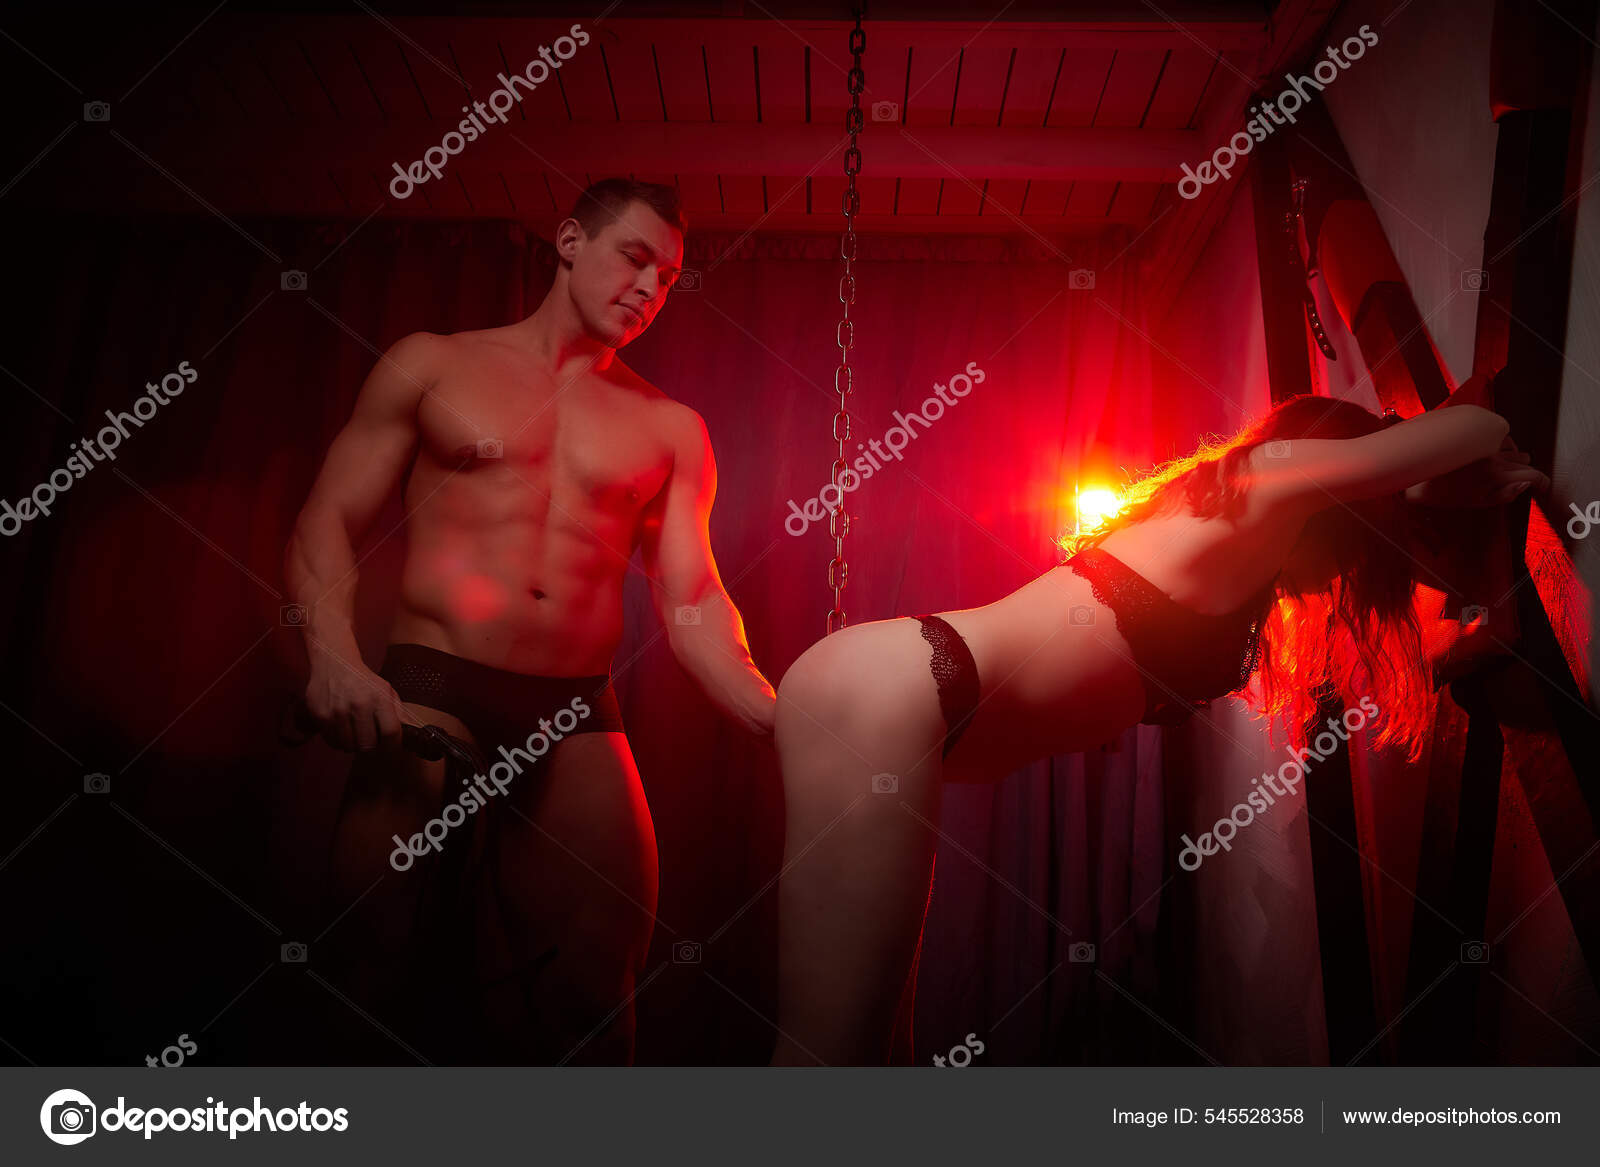 Adult sex bdsm games. Couple playing sexual games pic